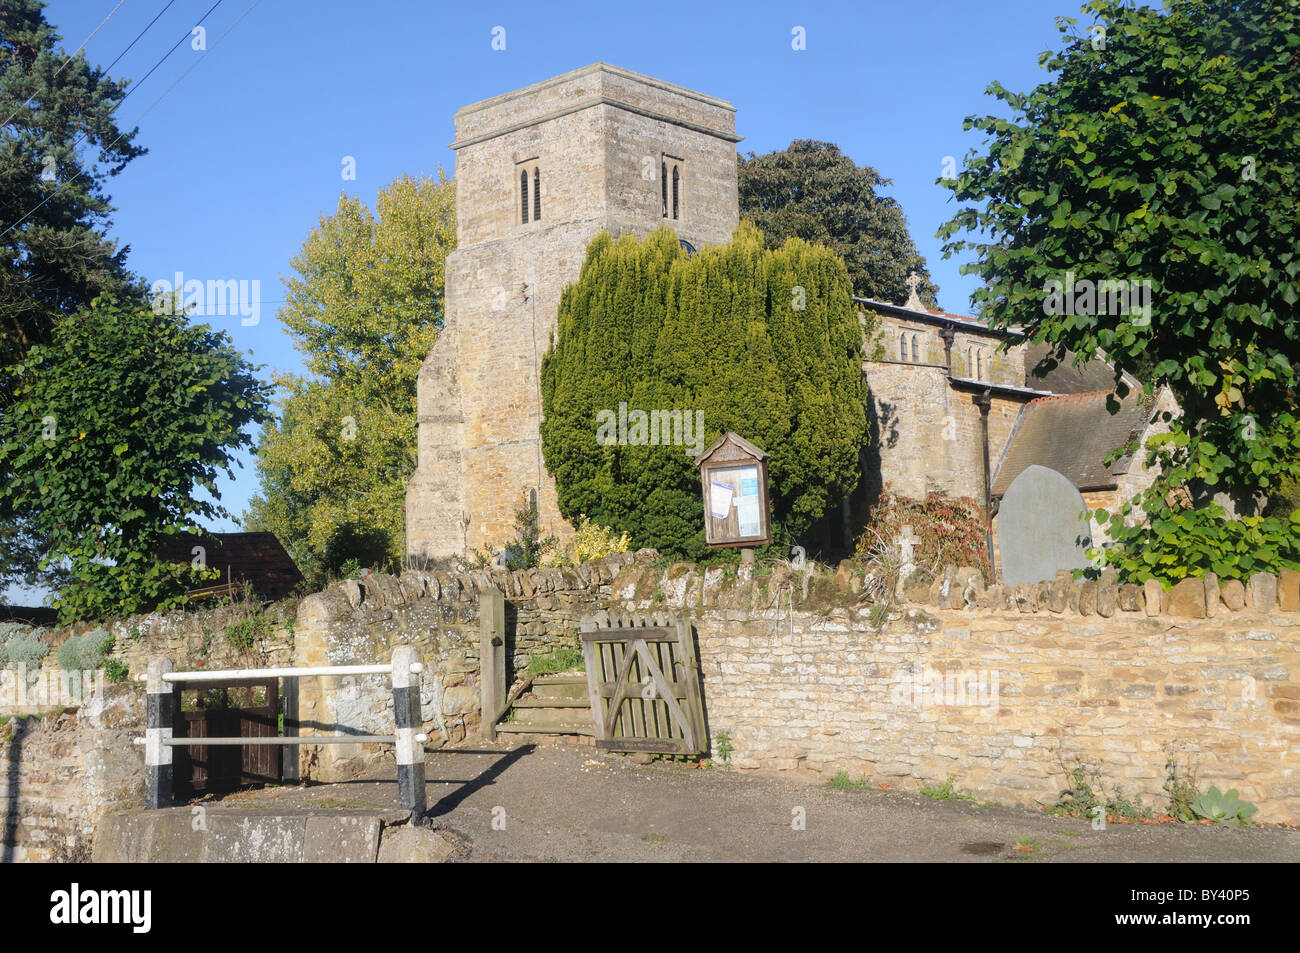 The Church of St. Catherine, in Draughton, Northamptonshire, England Stock Photo